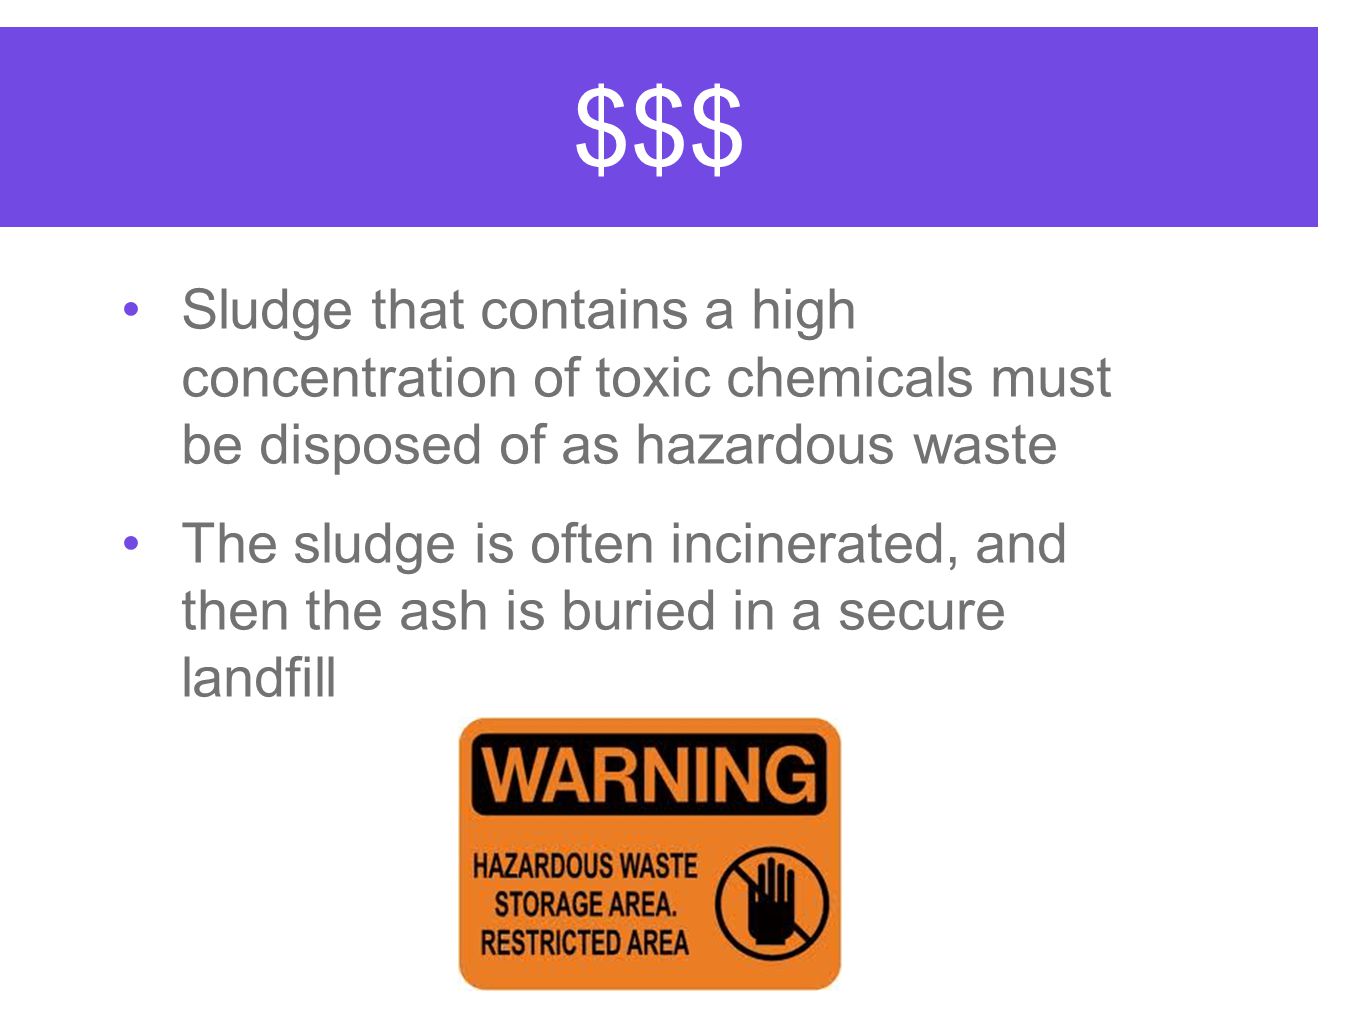 $$$ Sludge that contains a high concentration of toxic chemicals must be disposed of as hazardous waste.